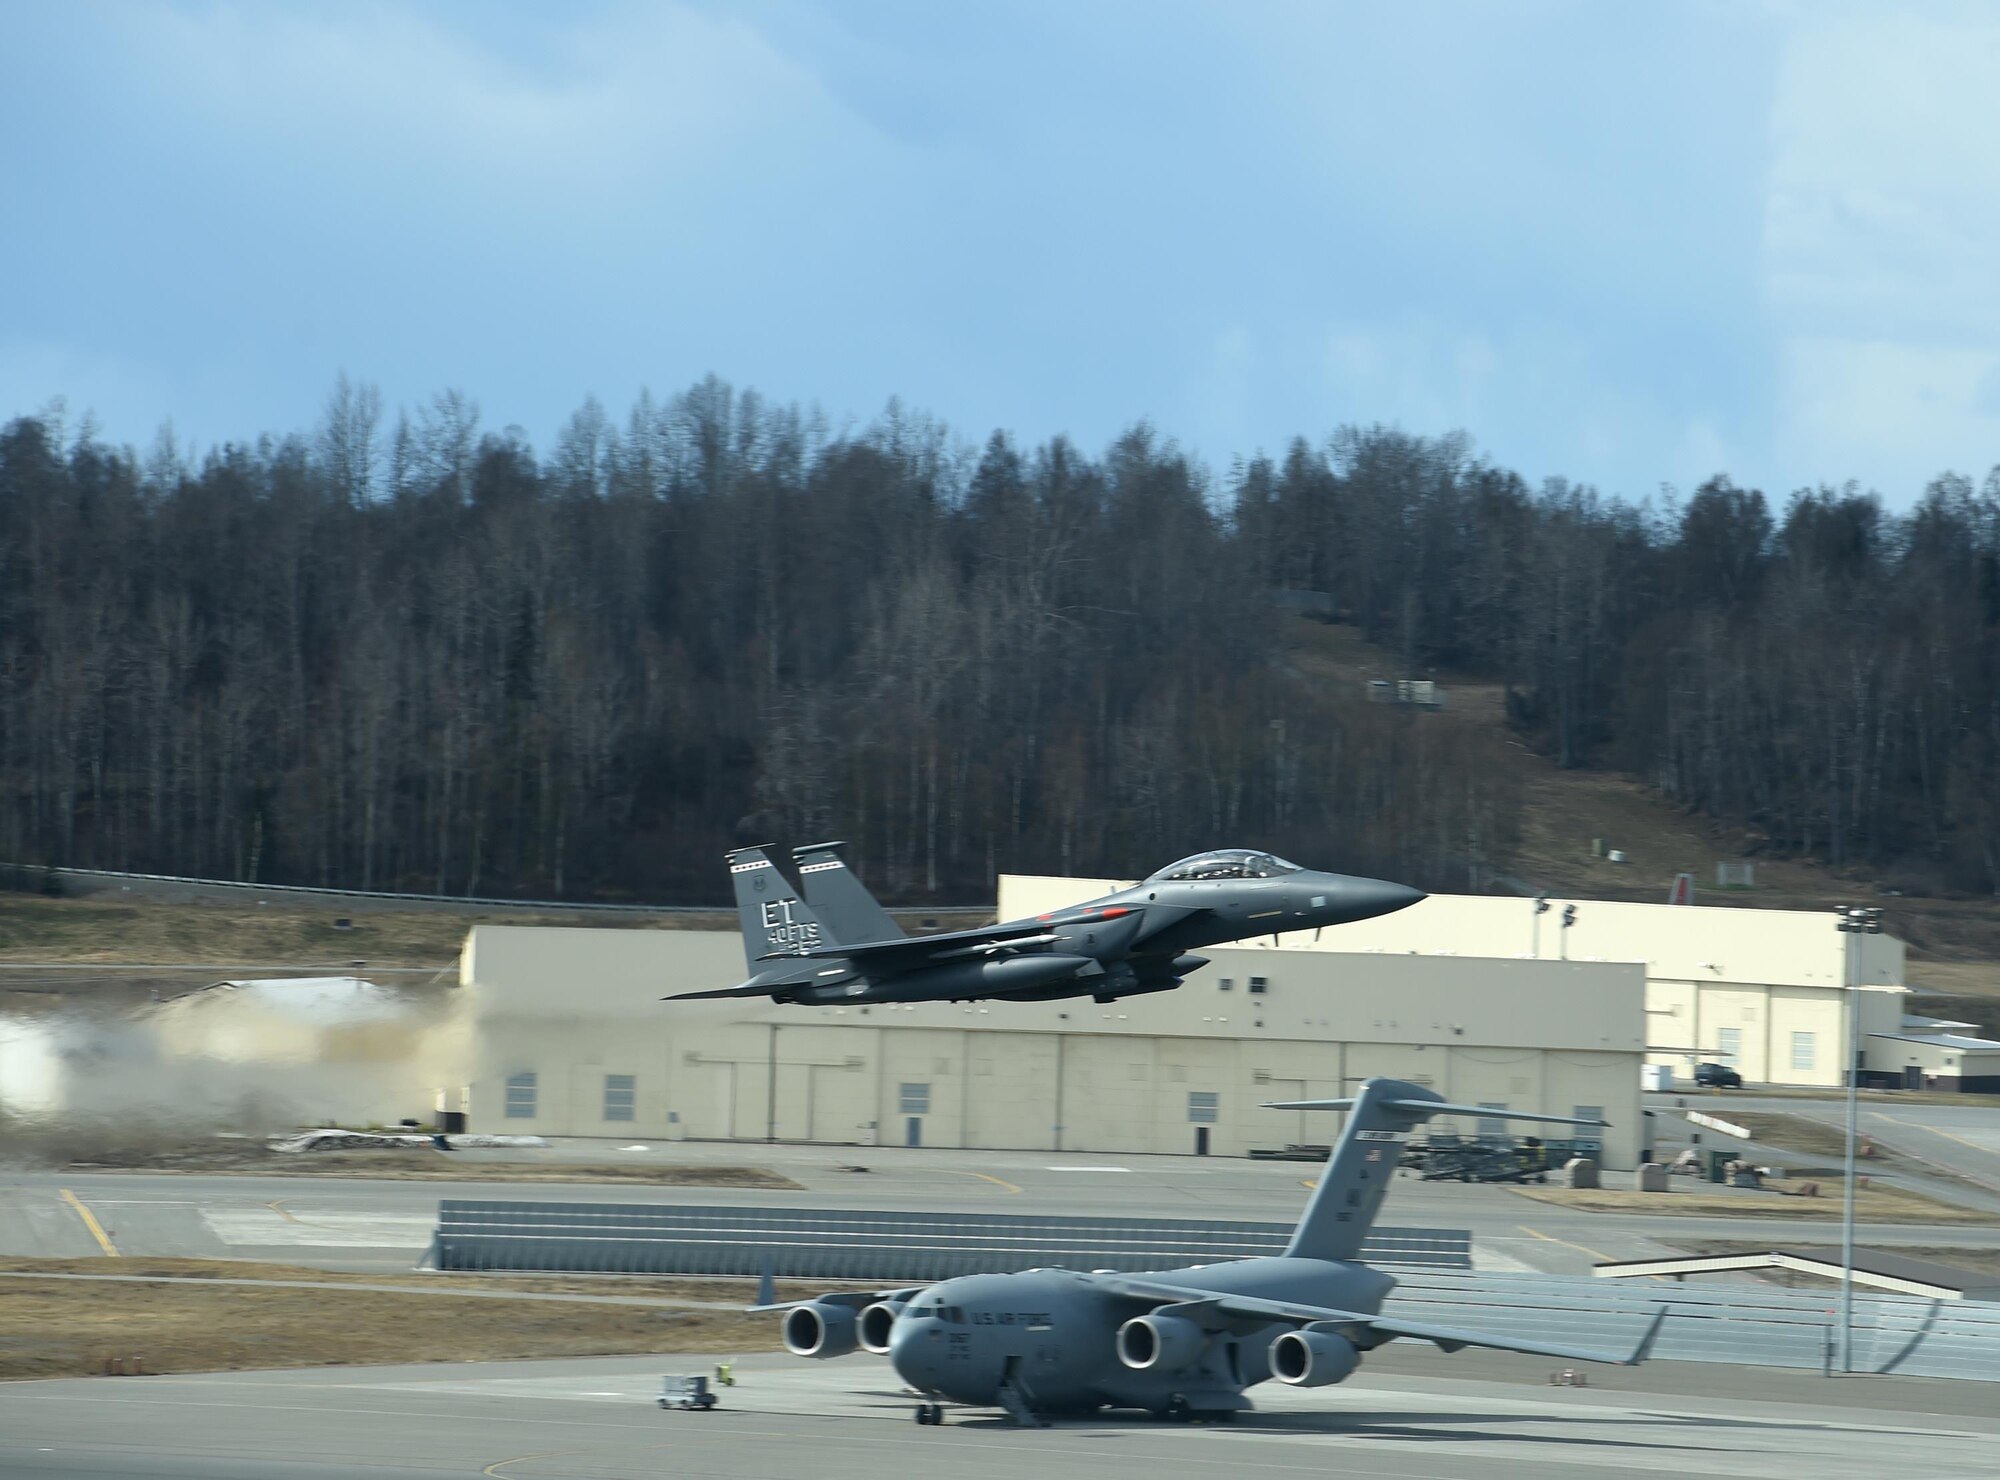 An F-15 Eagle from Eglin Air Force Base, Fla. takes off at Joint Base Elmendorf-Richardson, Alaska, during exercise Northern Edge 17, May 3, 2017. Northern Edge is Alaska’s premier joint training exercise designed to practice operations, techniques and procedures as well as enhance interoperability among the services. Thousands of participants from all the services – Airmen, Soldiers, Sailors, Marines and Coast Guardsmen from active duty, Reserve and National Guard units – are involved. (U.S. Air Force photo by Airman 1st Class Javier Alvarez)